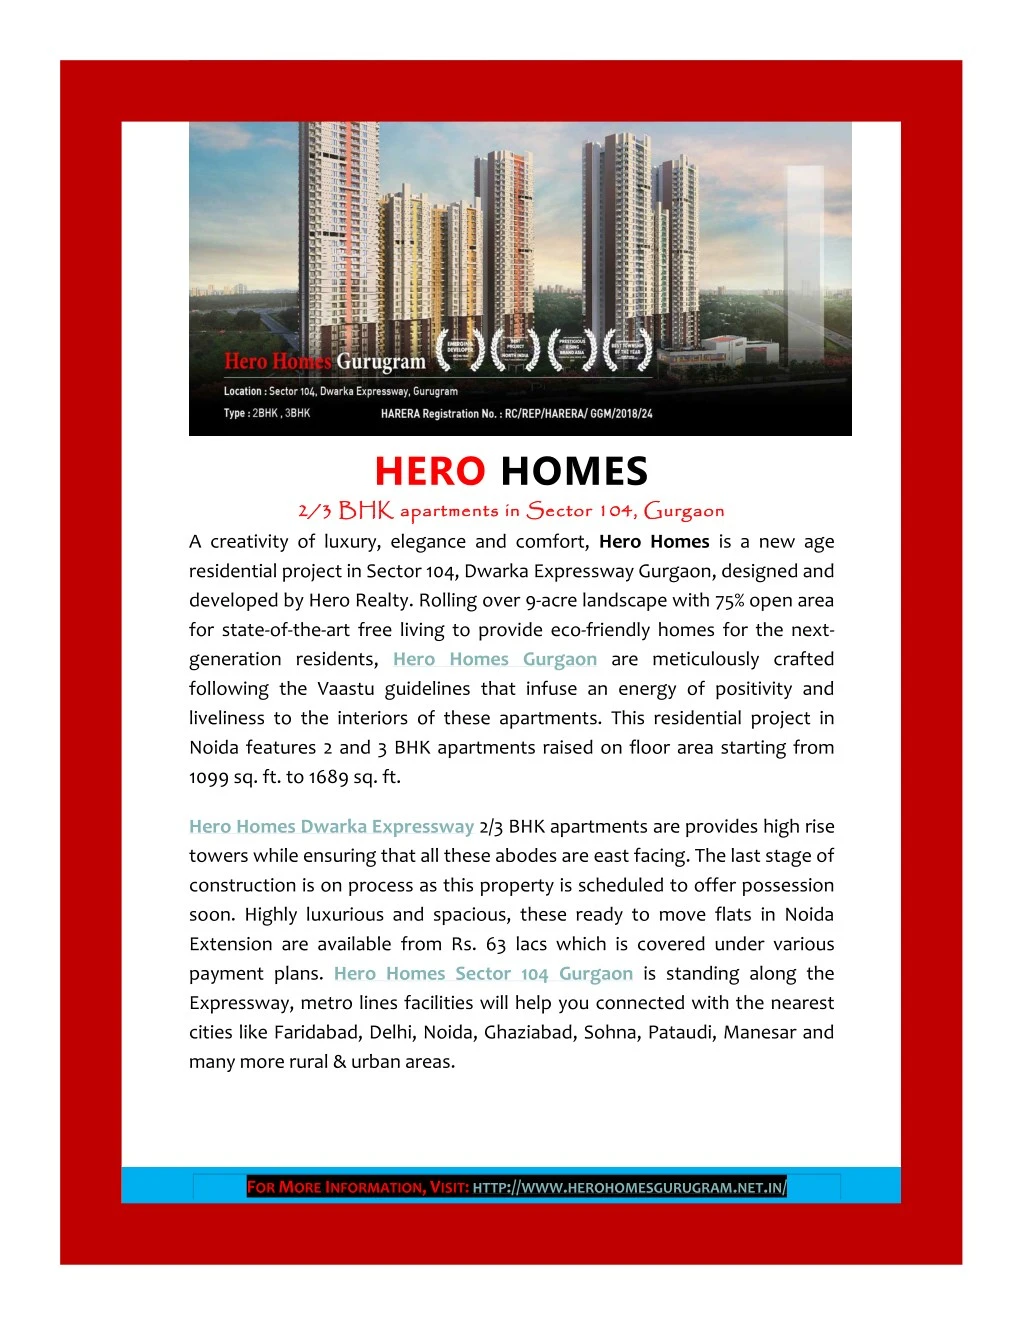 hero homes 2 3 bhk apartments in a creativity